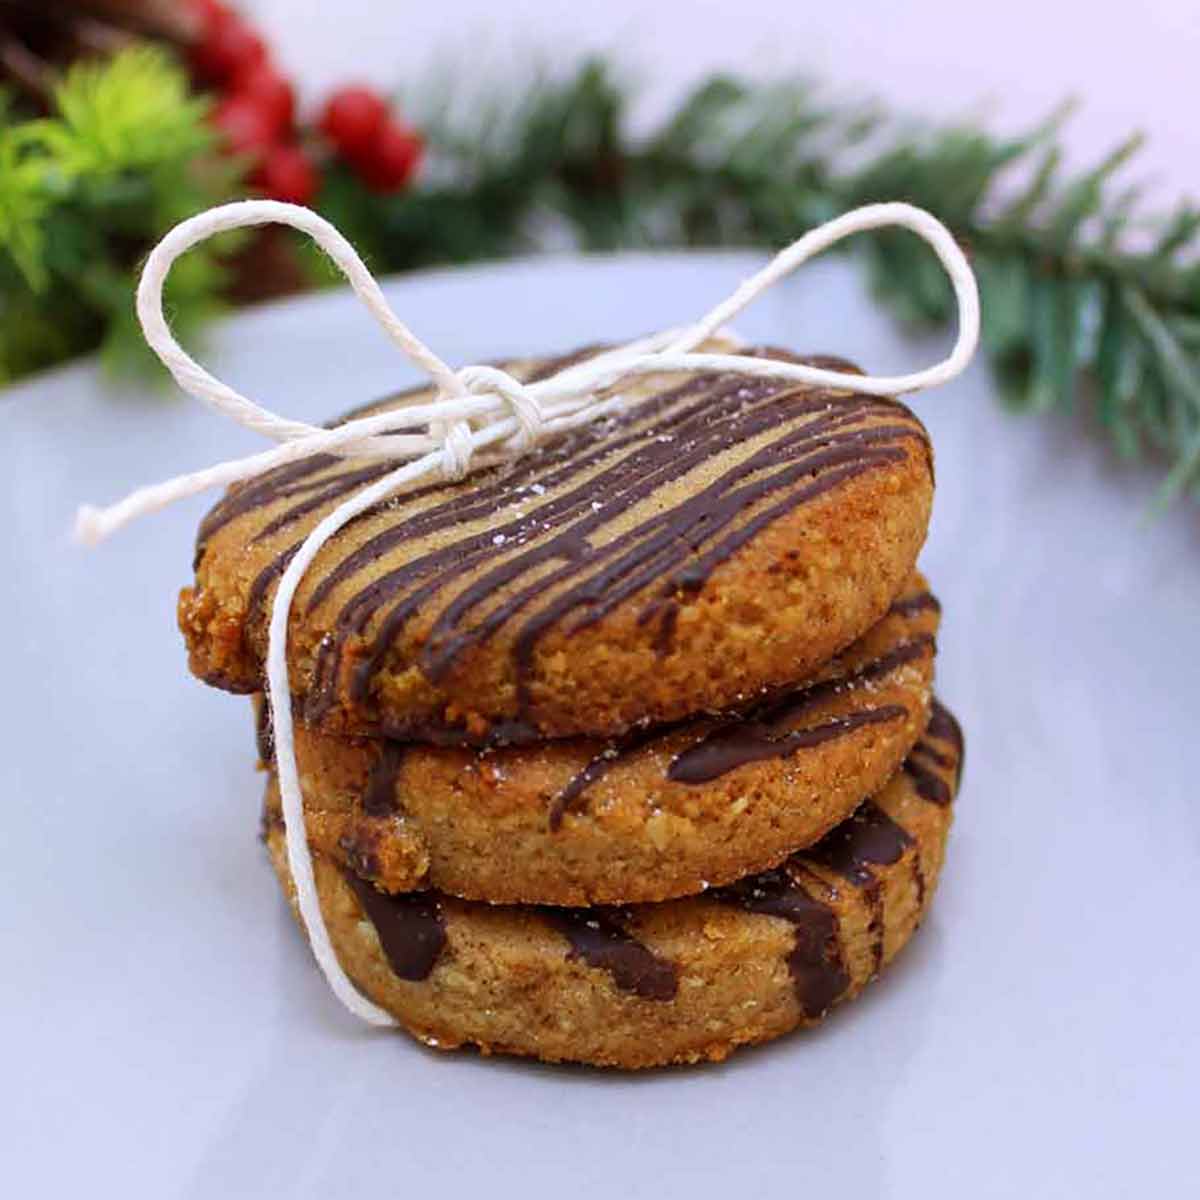 3 Chocolate Ginger Cookies